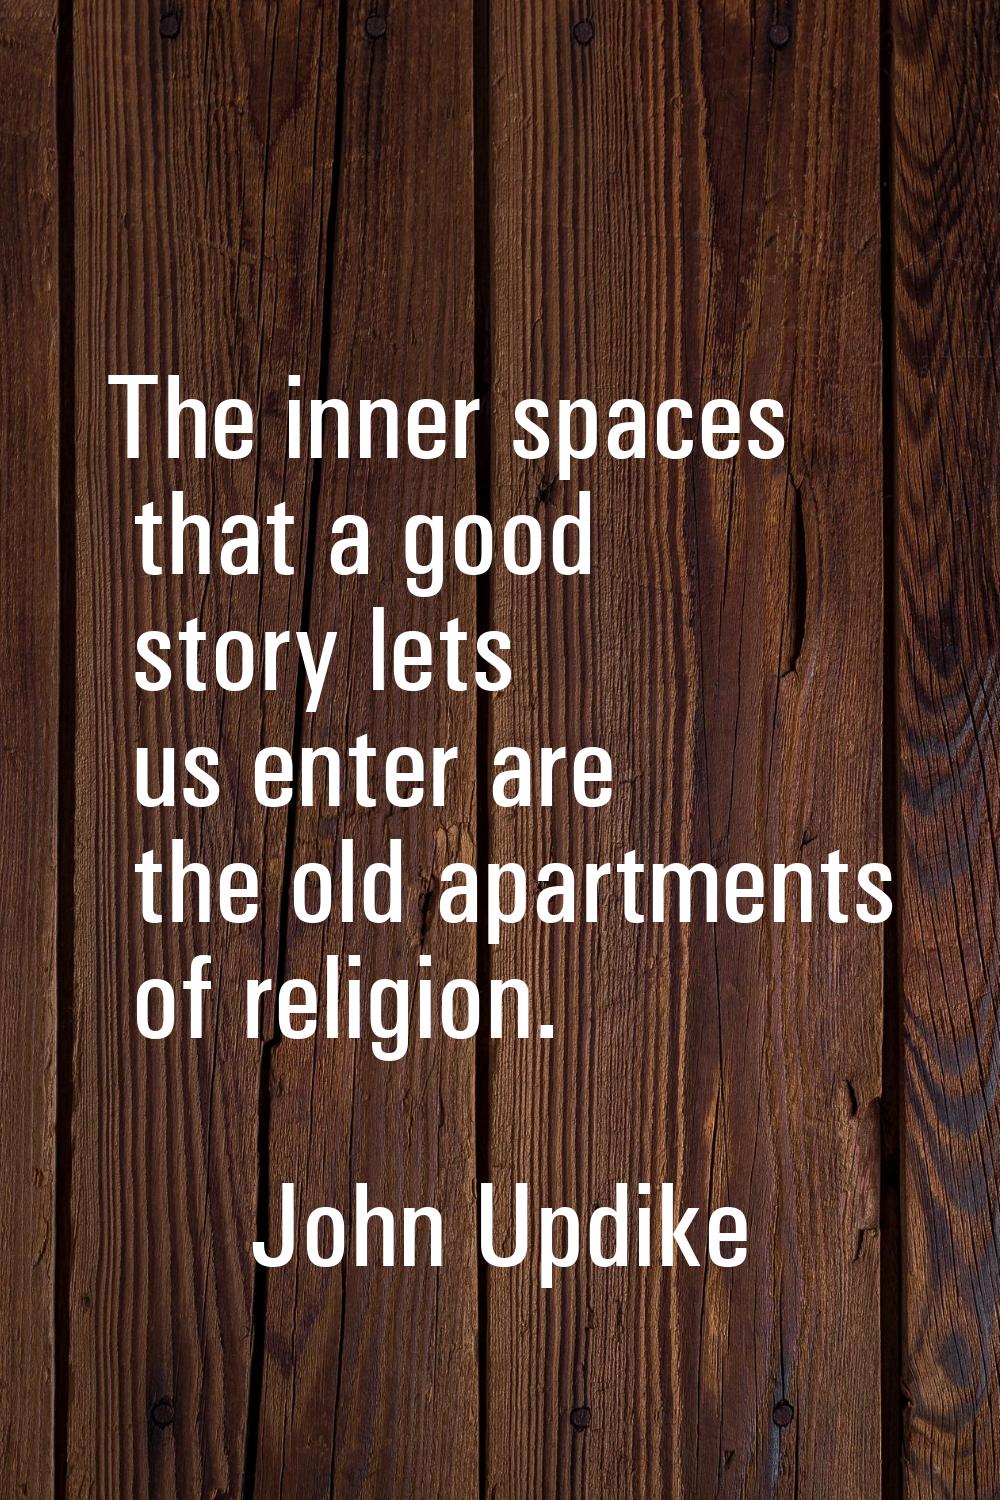 The inner spaces that a good story lets us enter are the old apartments of religion.